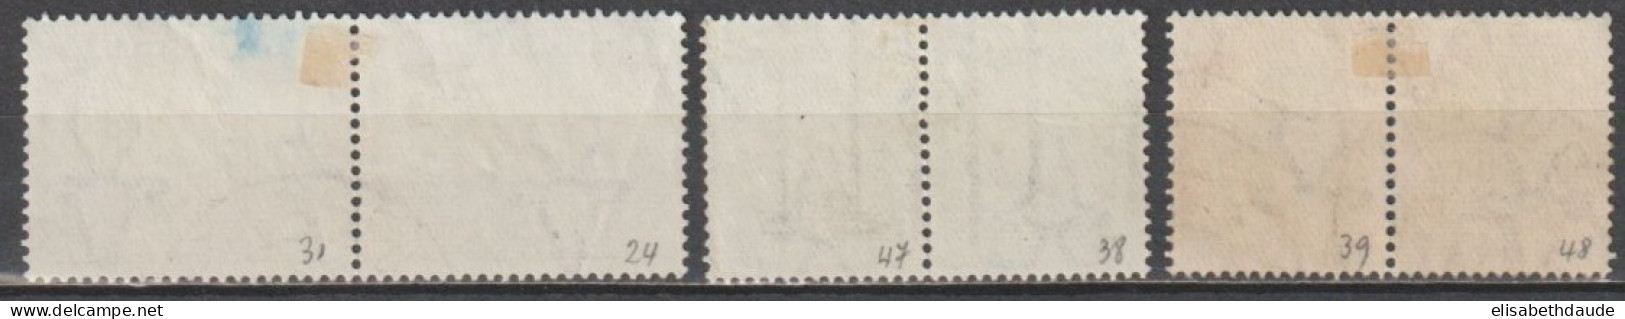 SOUTH AFRICA  - 1930 -  3 PAIRES SE TENANT YVERT N°38/40+47/49 OBLITEREES  - COTE = 28 EUR - Used Stamps